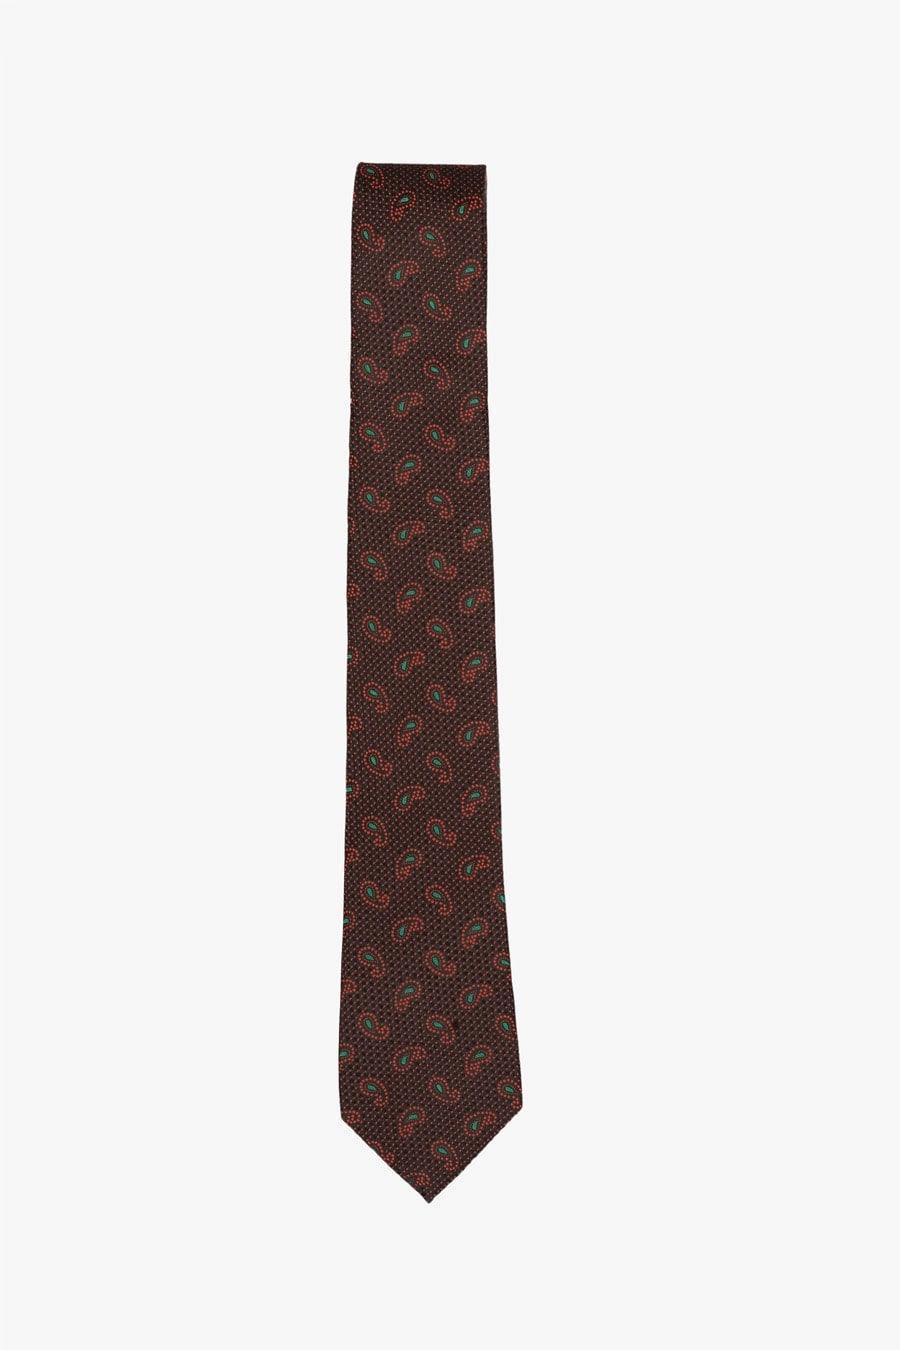 POLY SILK TIE 012 at Charcoal Clothing